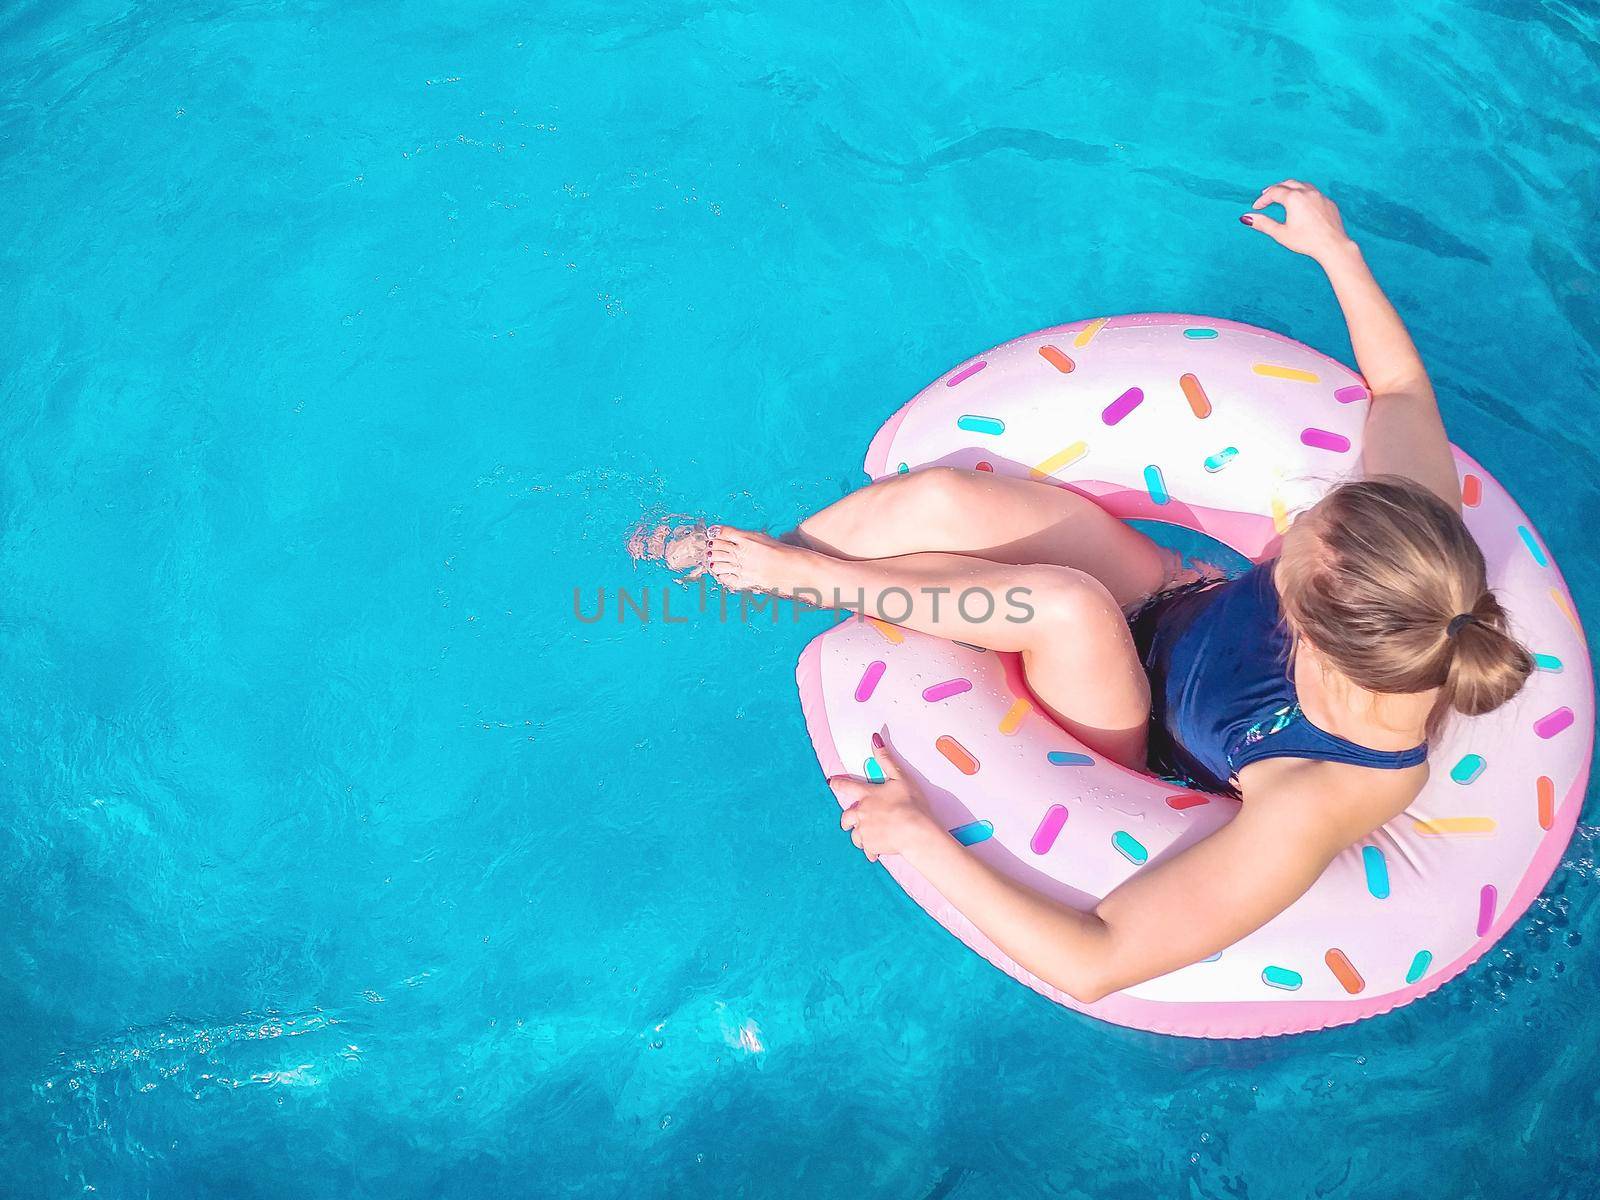 Summer warm vacation. The girl sits on a rubber ring in the form of a donut in a blue pool. Time to relax on an air mattress. Having fun in the water for a family vacation. Sea resort. Copy space.